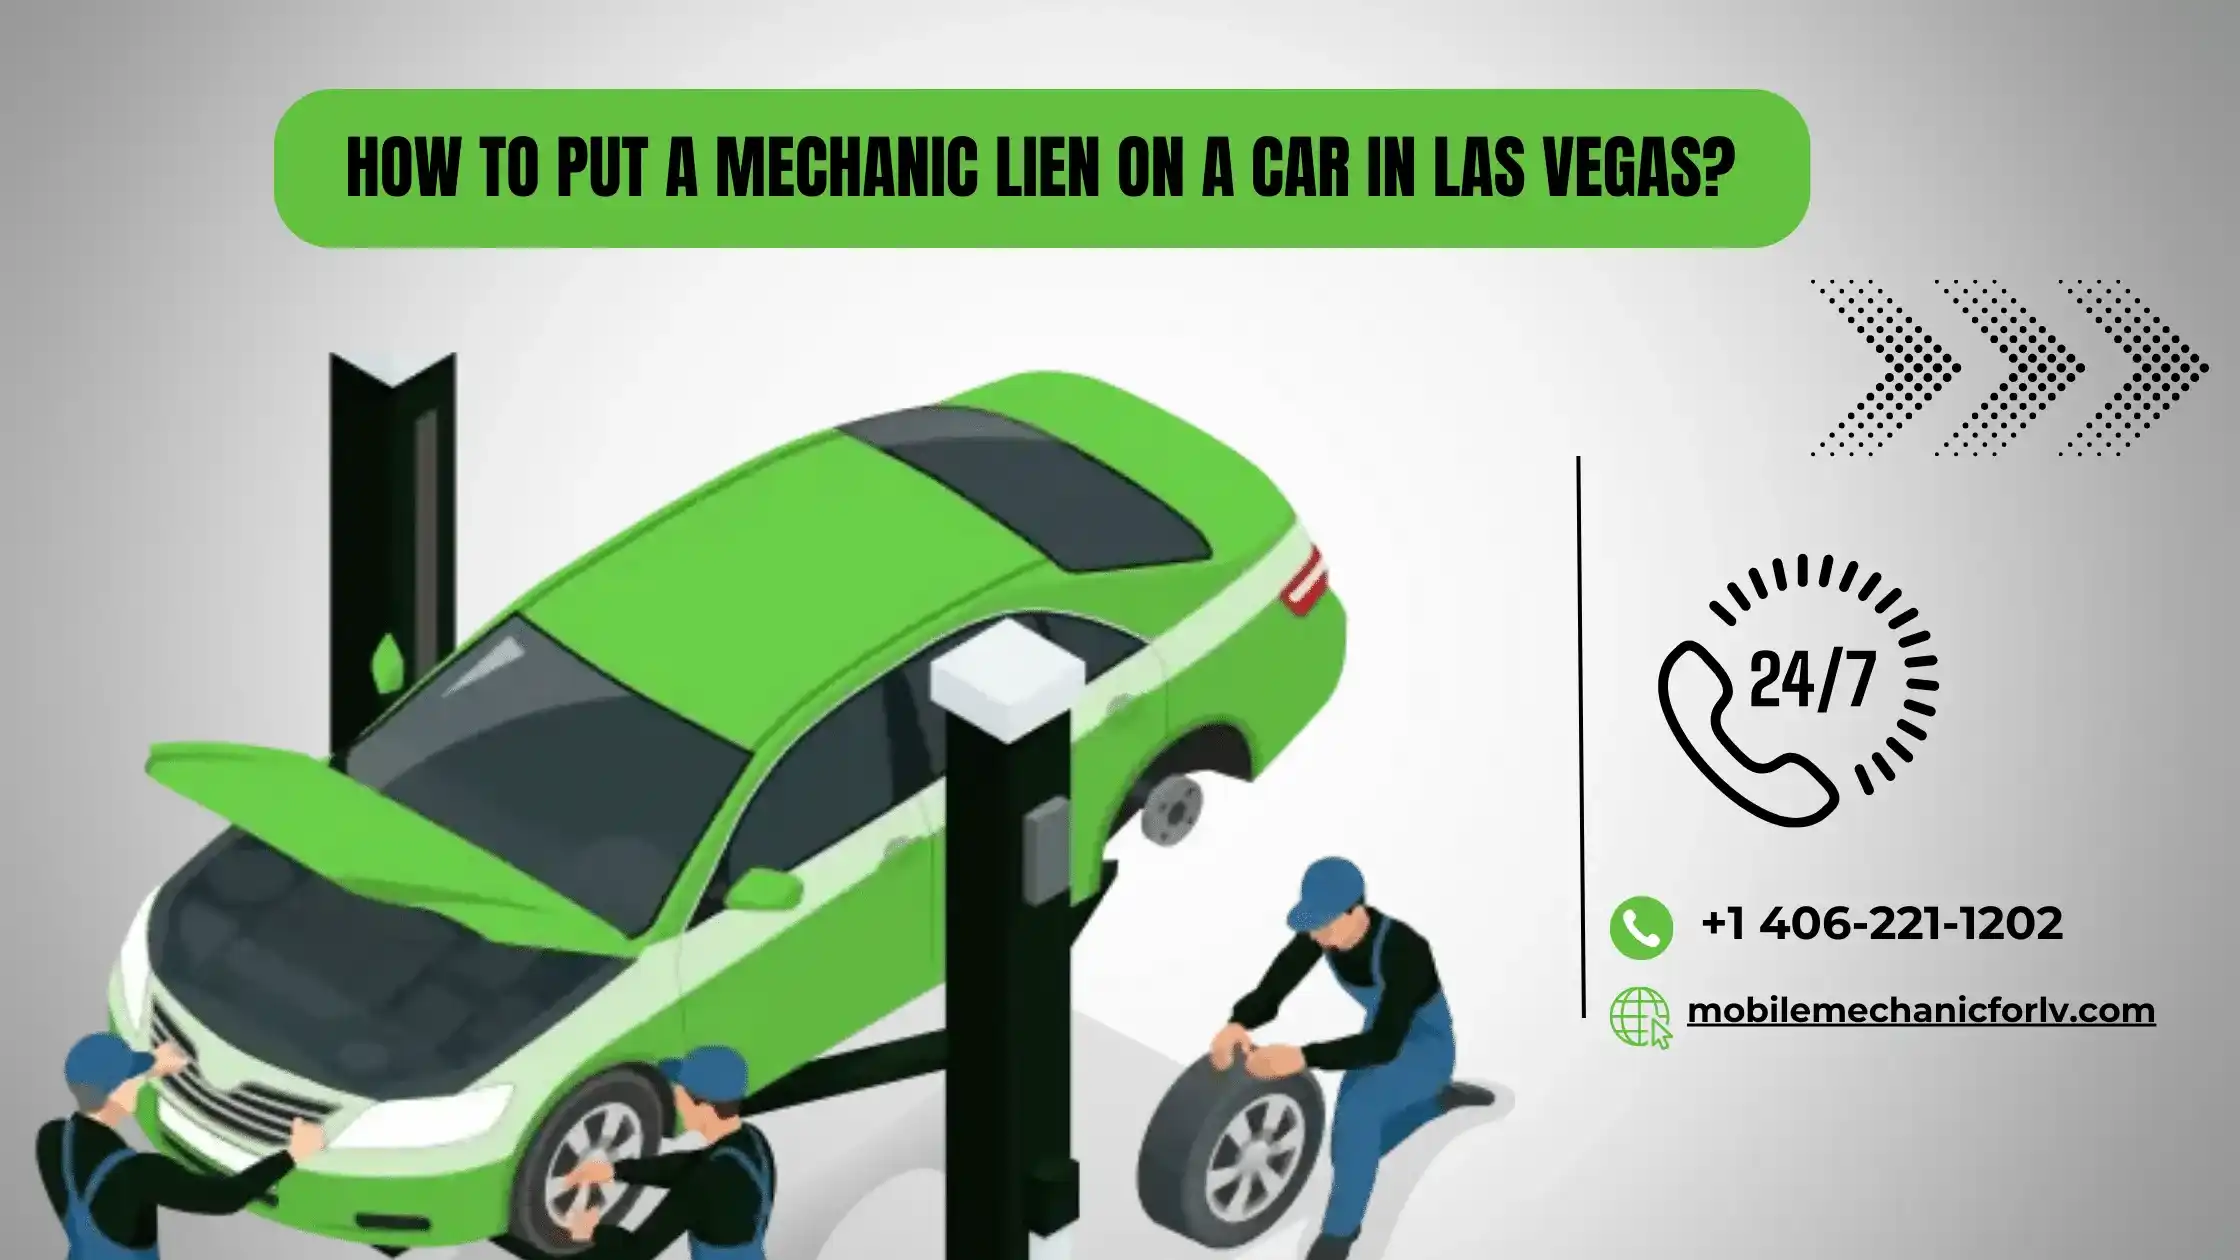 How to Put a Mechanic Lien on a Car in Las Vegas